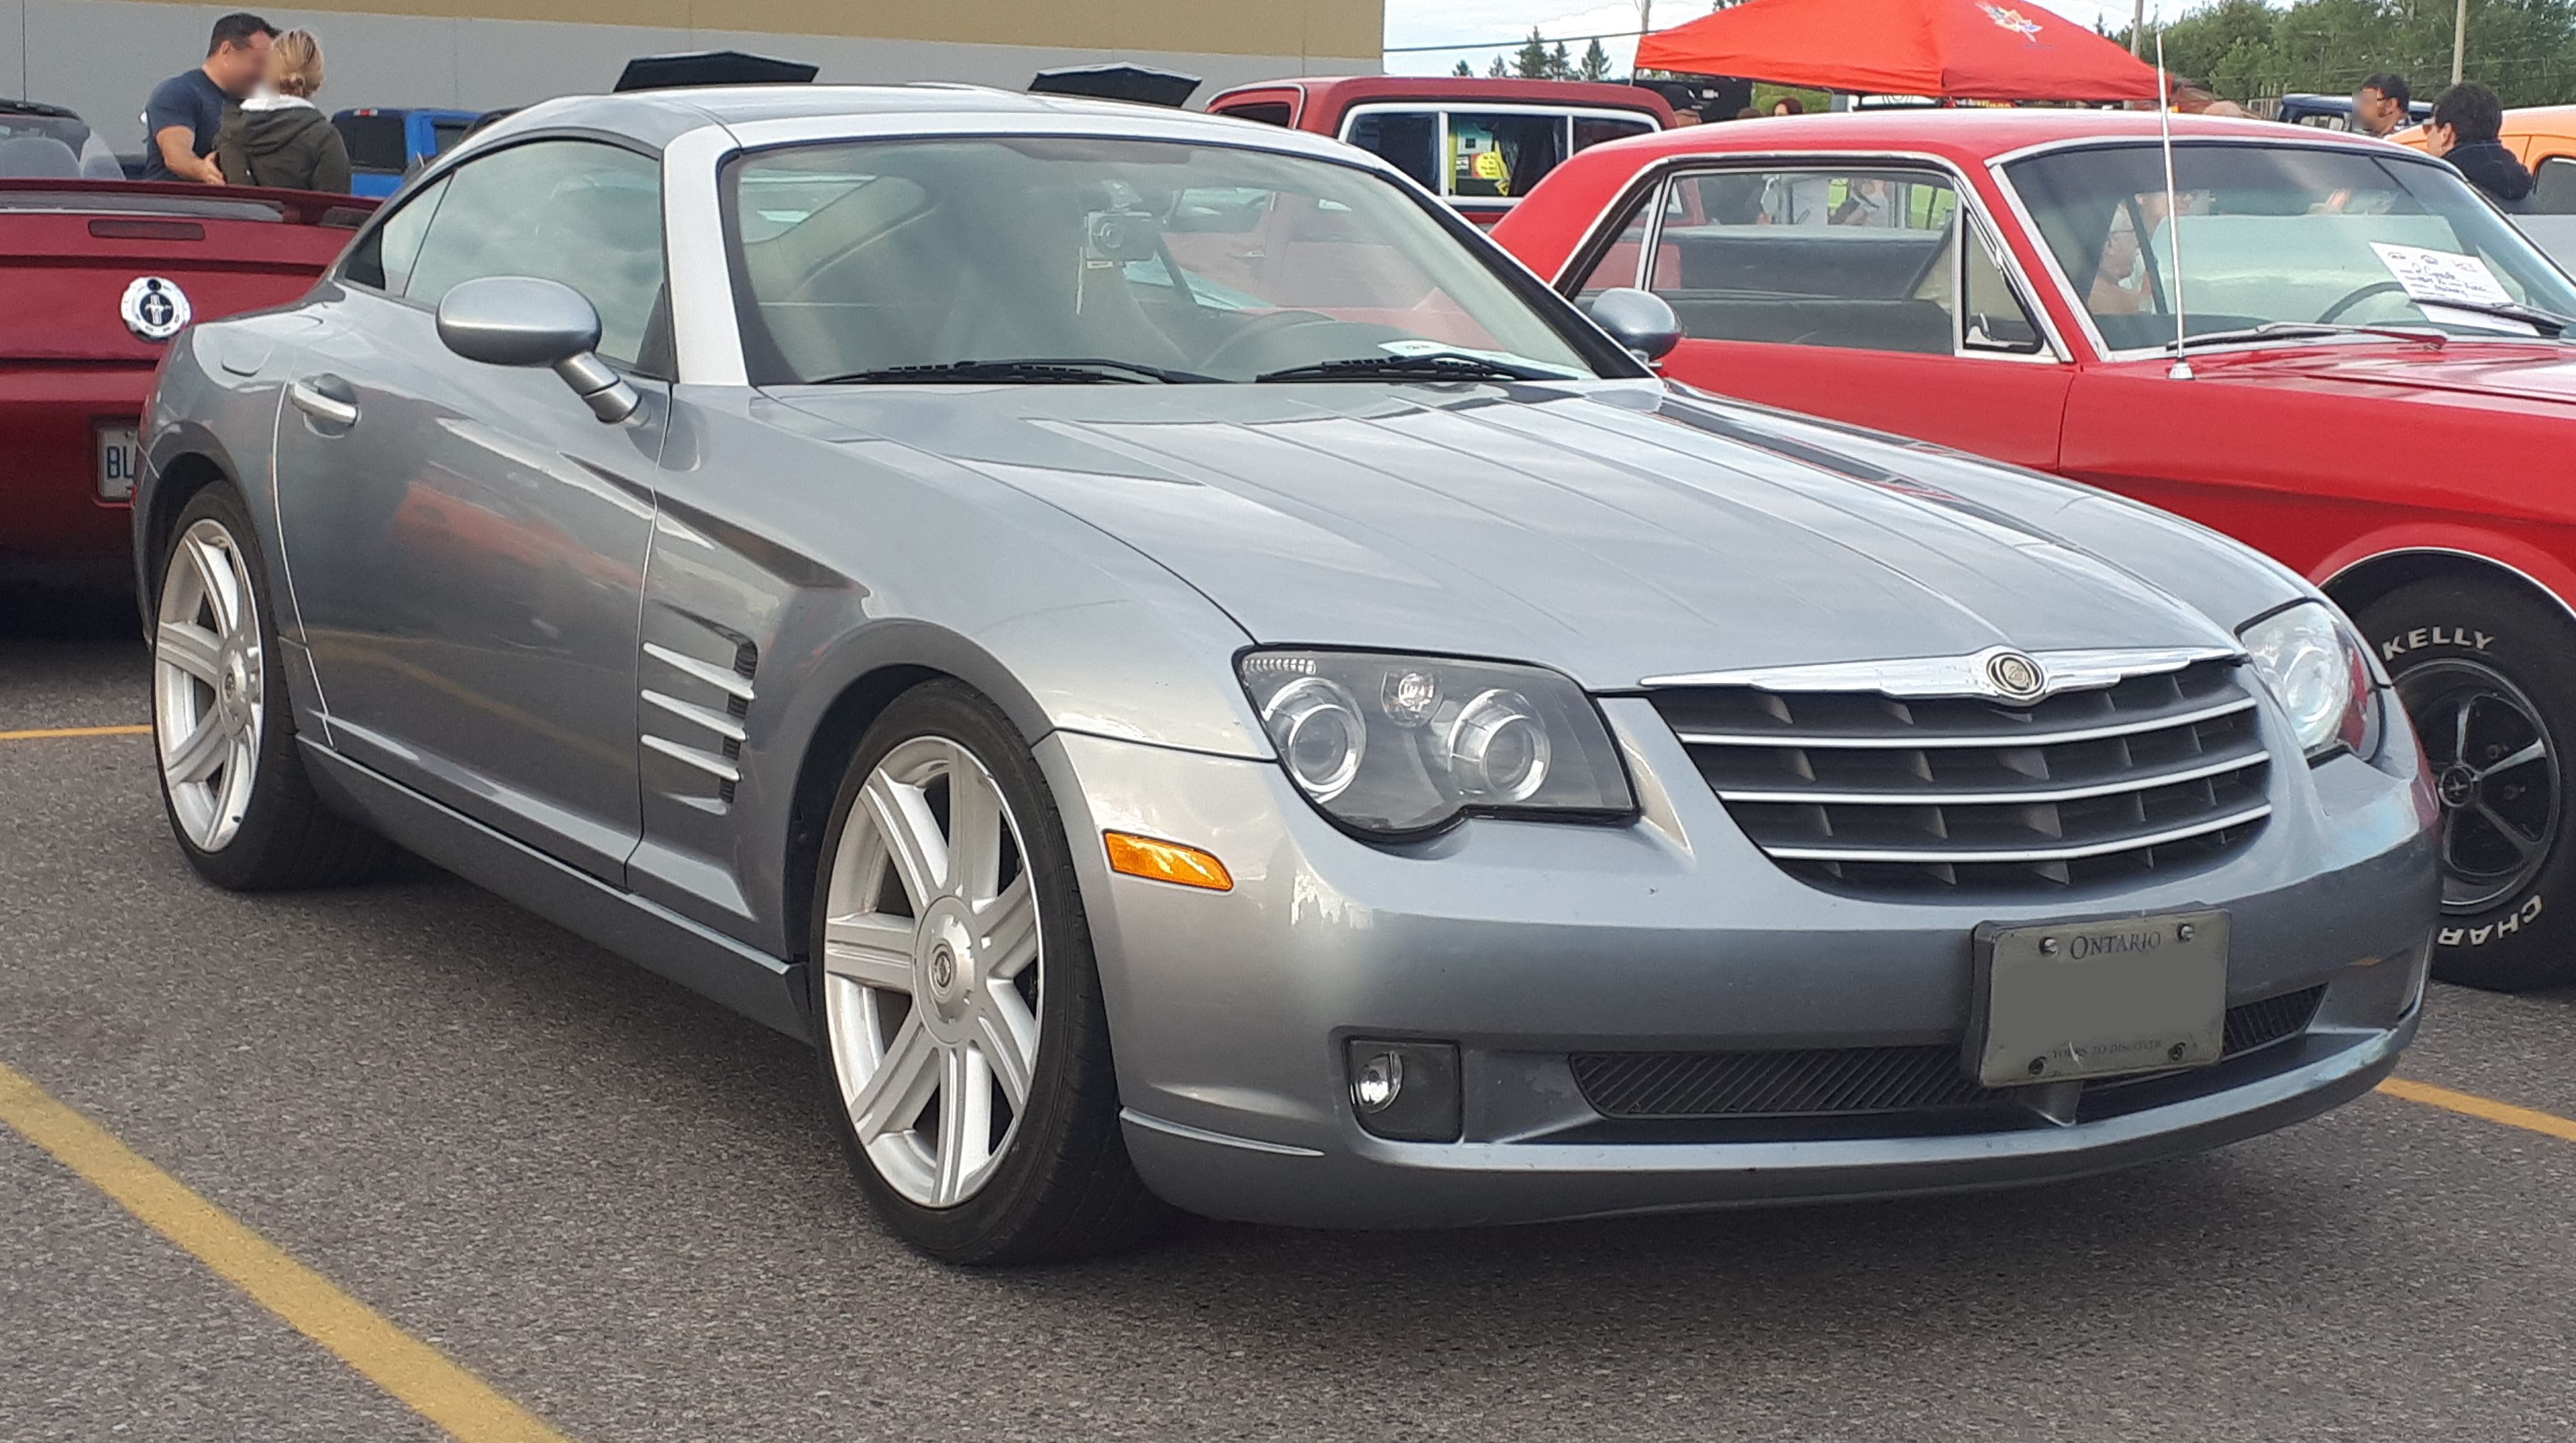 The 2004 Chrysler Crossfire on a parking lot.